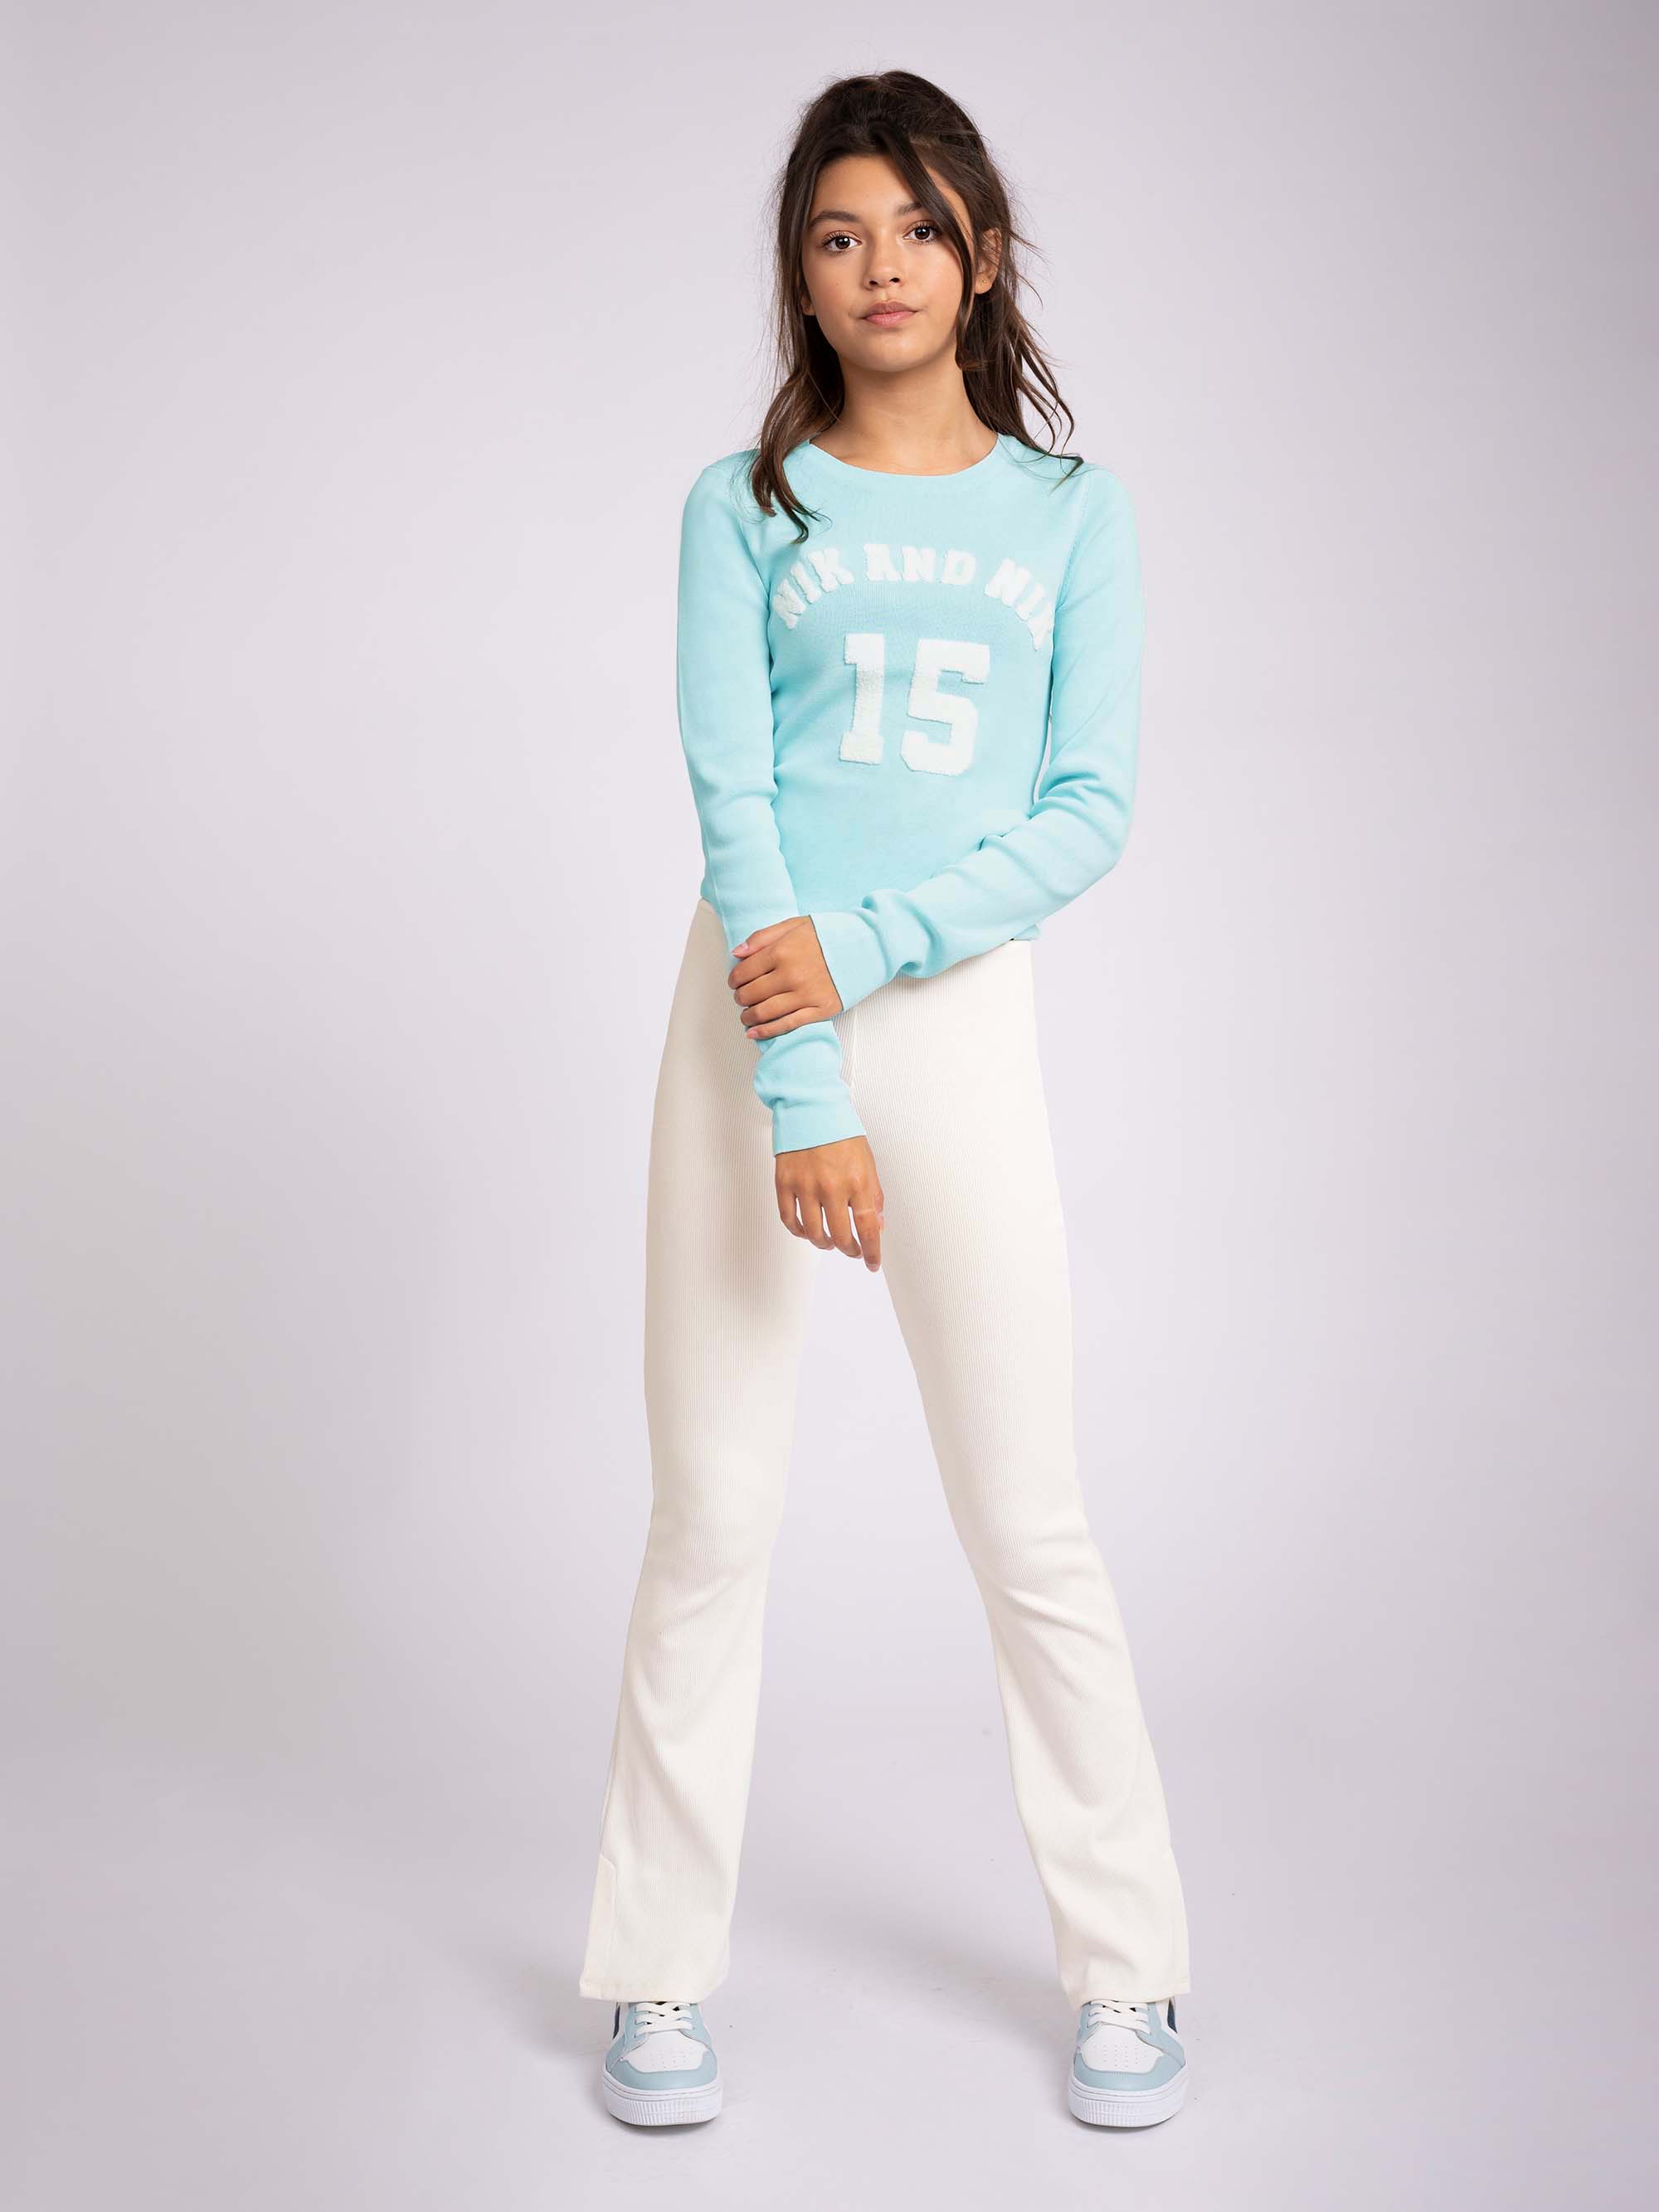 Fitted NIKANDNIK long sleeve Top 